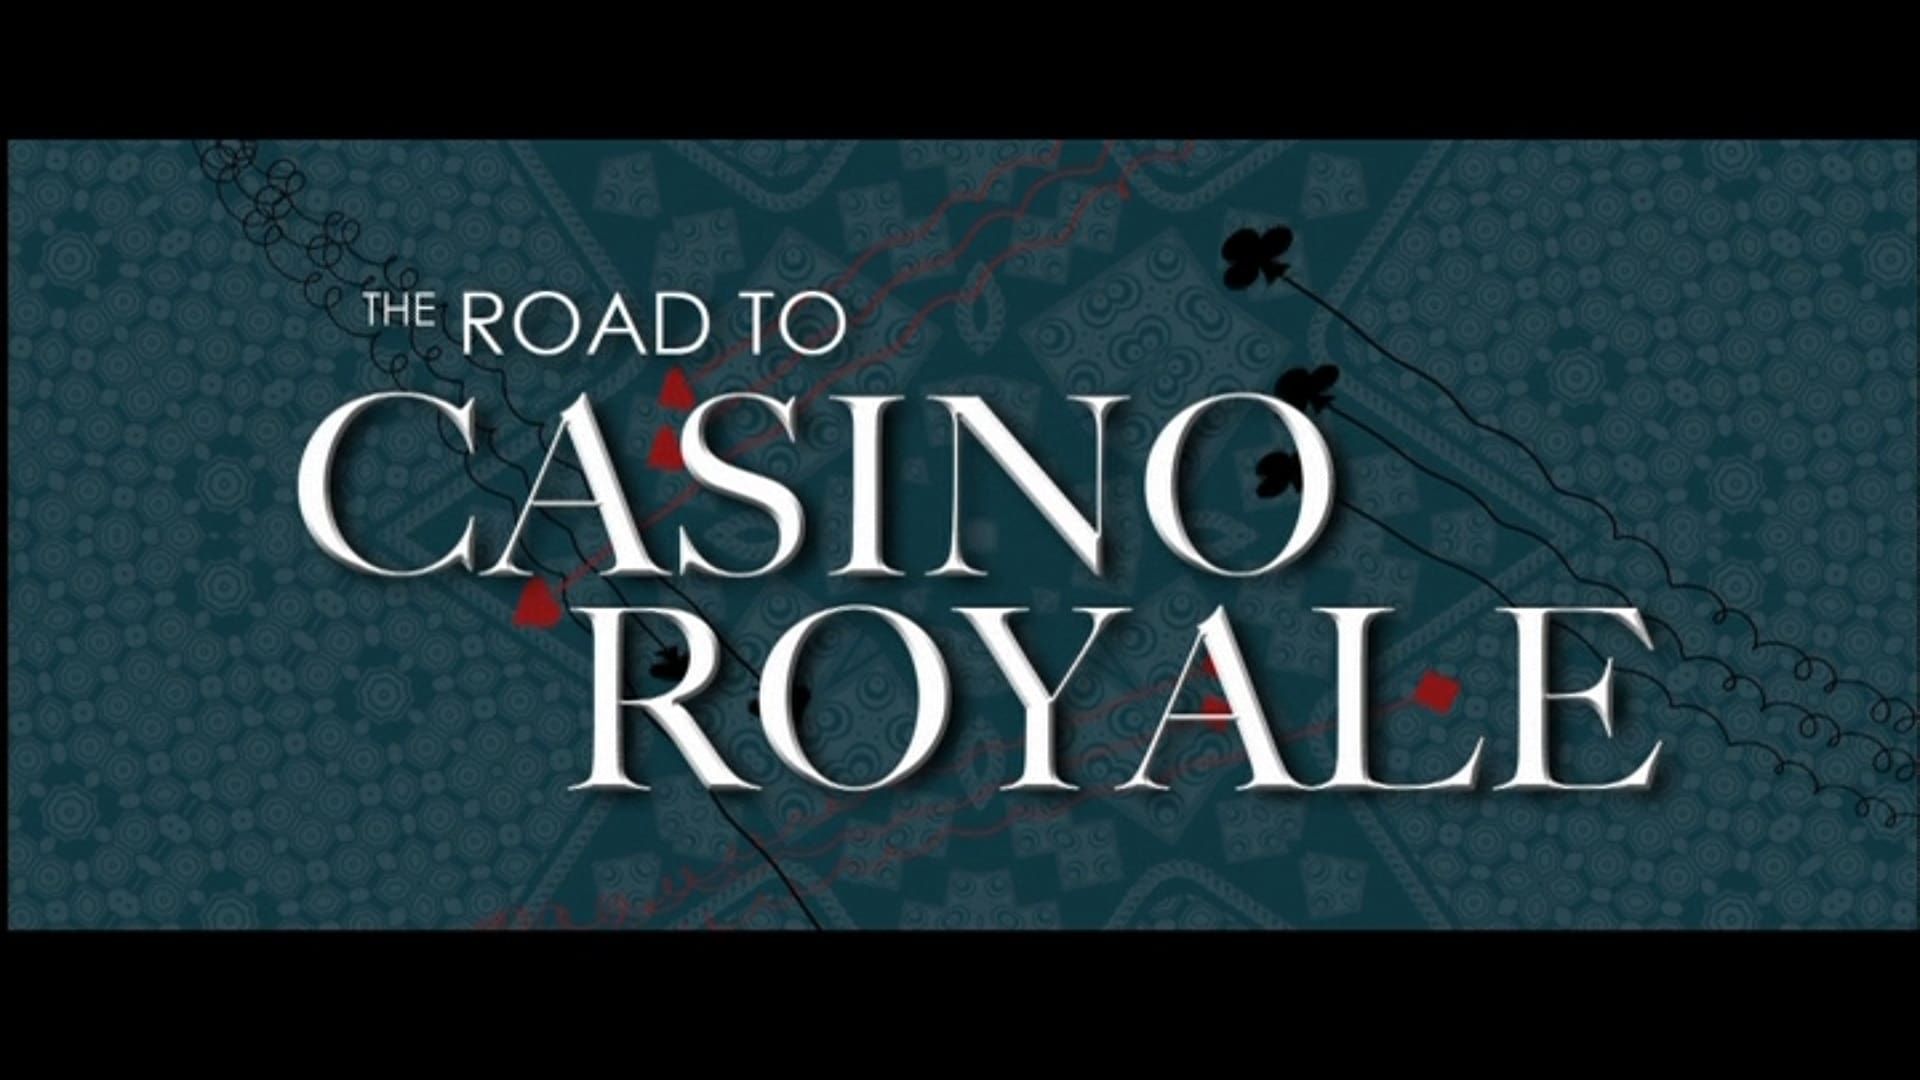 The Road to Casino Royale background